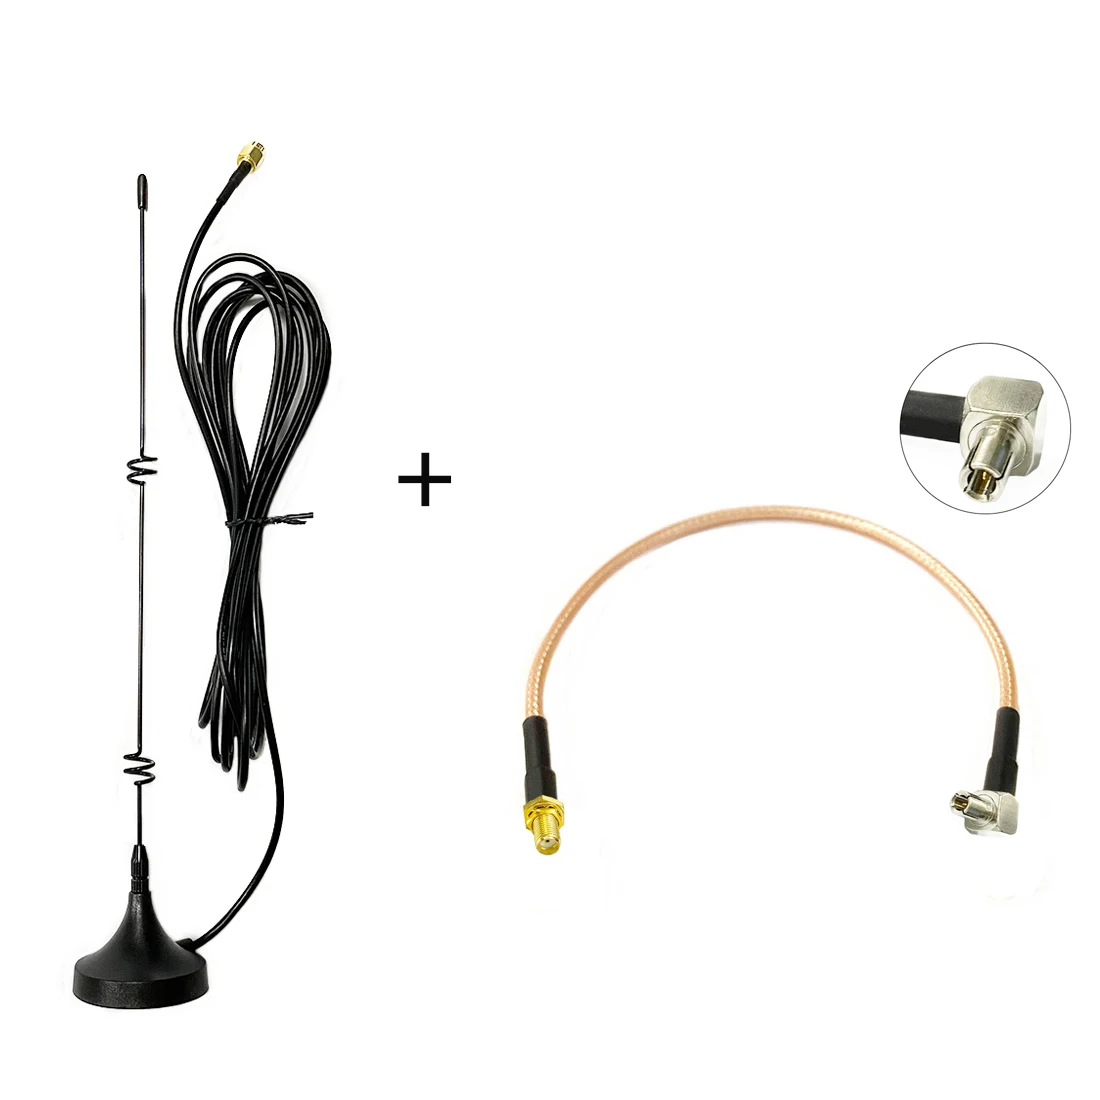 4G 3G GSM Antenna 6dbi High Gain Magnetic Base with 3meters Cable SMA Male +SMA Female Connector  to TS9 Male RG316 Cable 15cm 5pcs 2 4g 6dbi sma male plug antenna 160mm white for wireless router wifi antenna connector dual band aerial